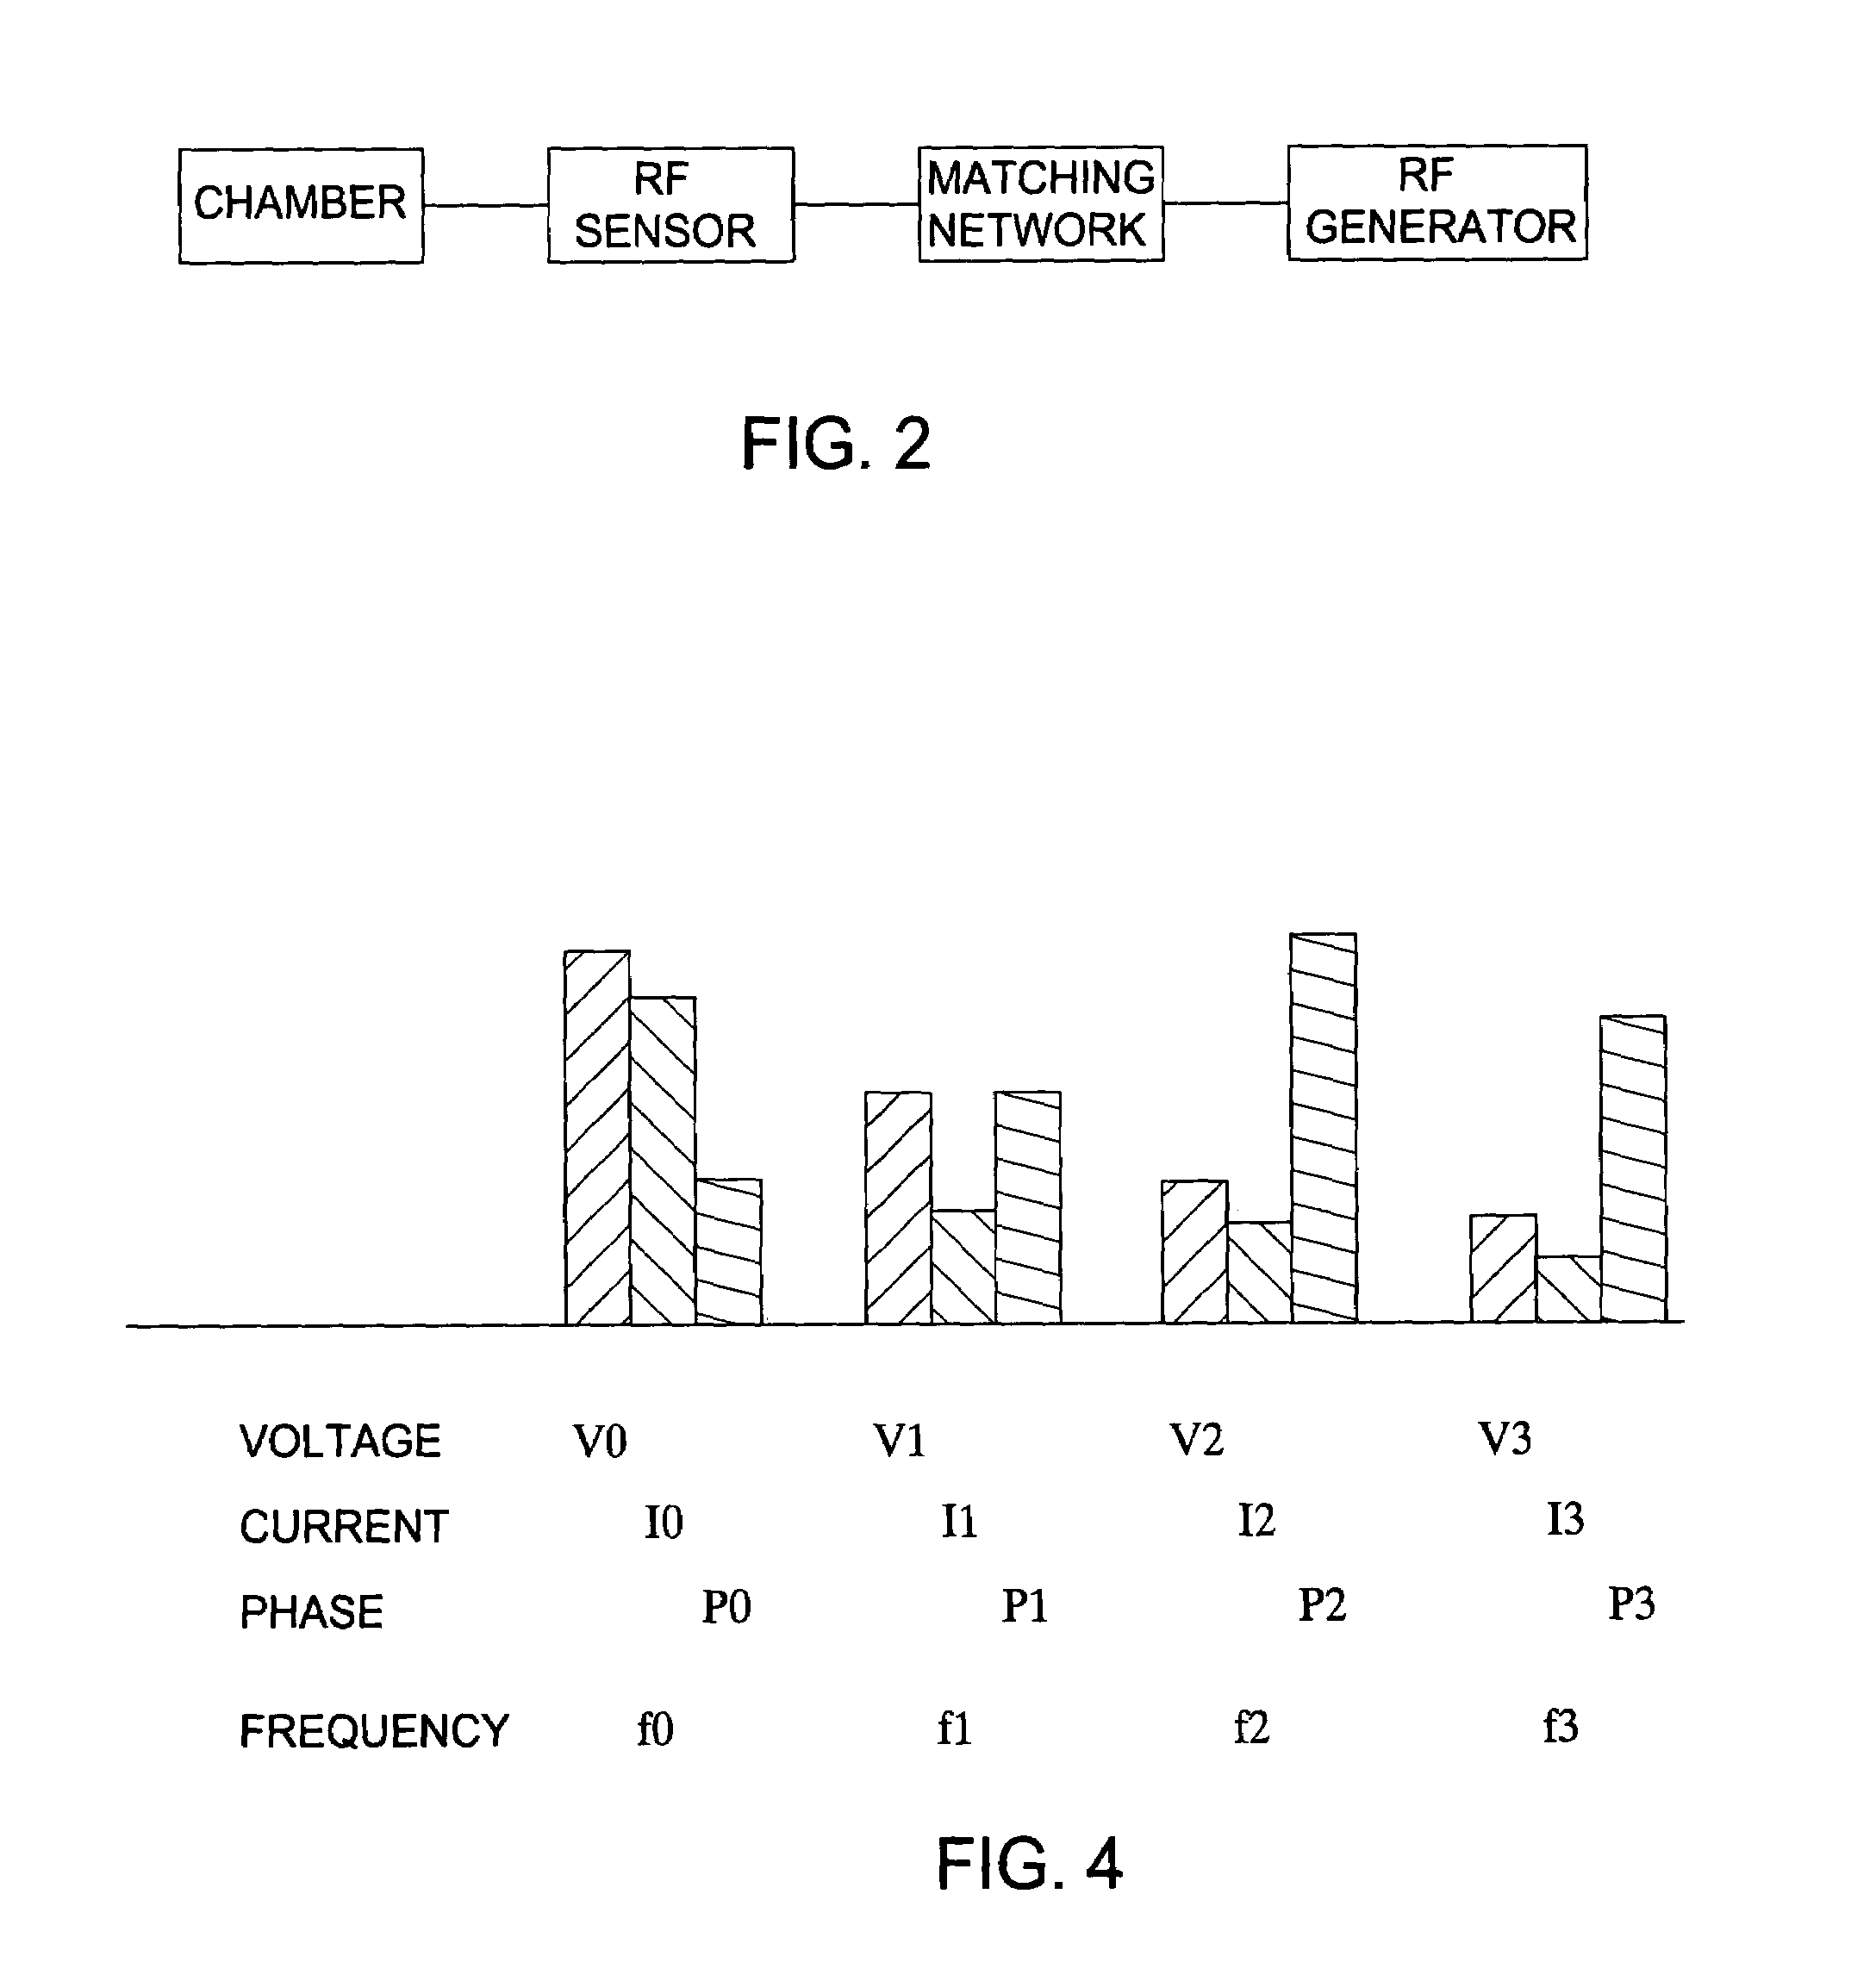 Method for automatic determination of semiconductor plasma chamber matching and source of fault by comprehensive plasma monitoring